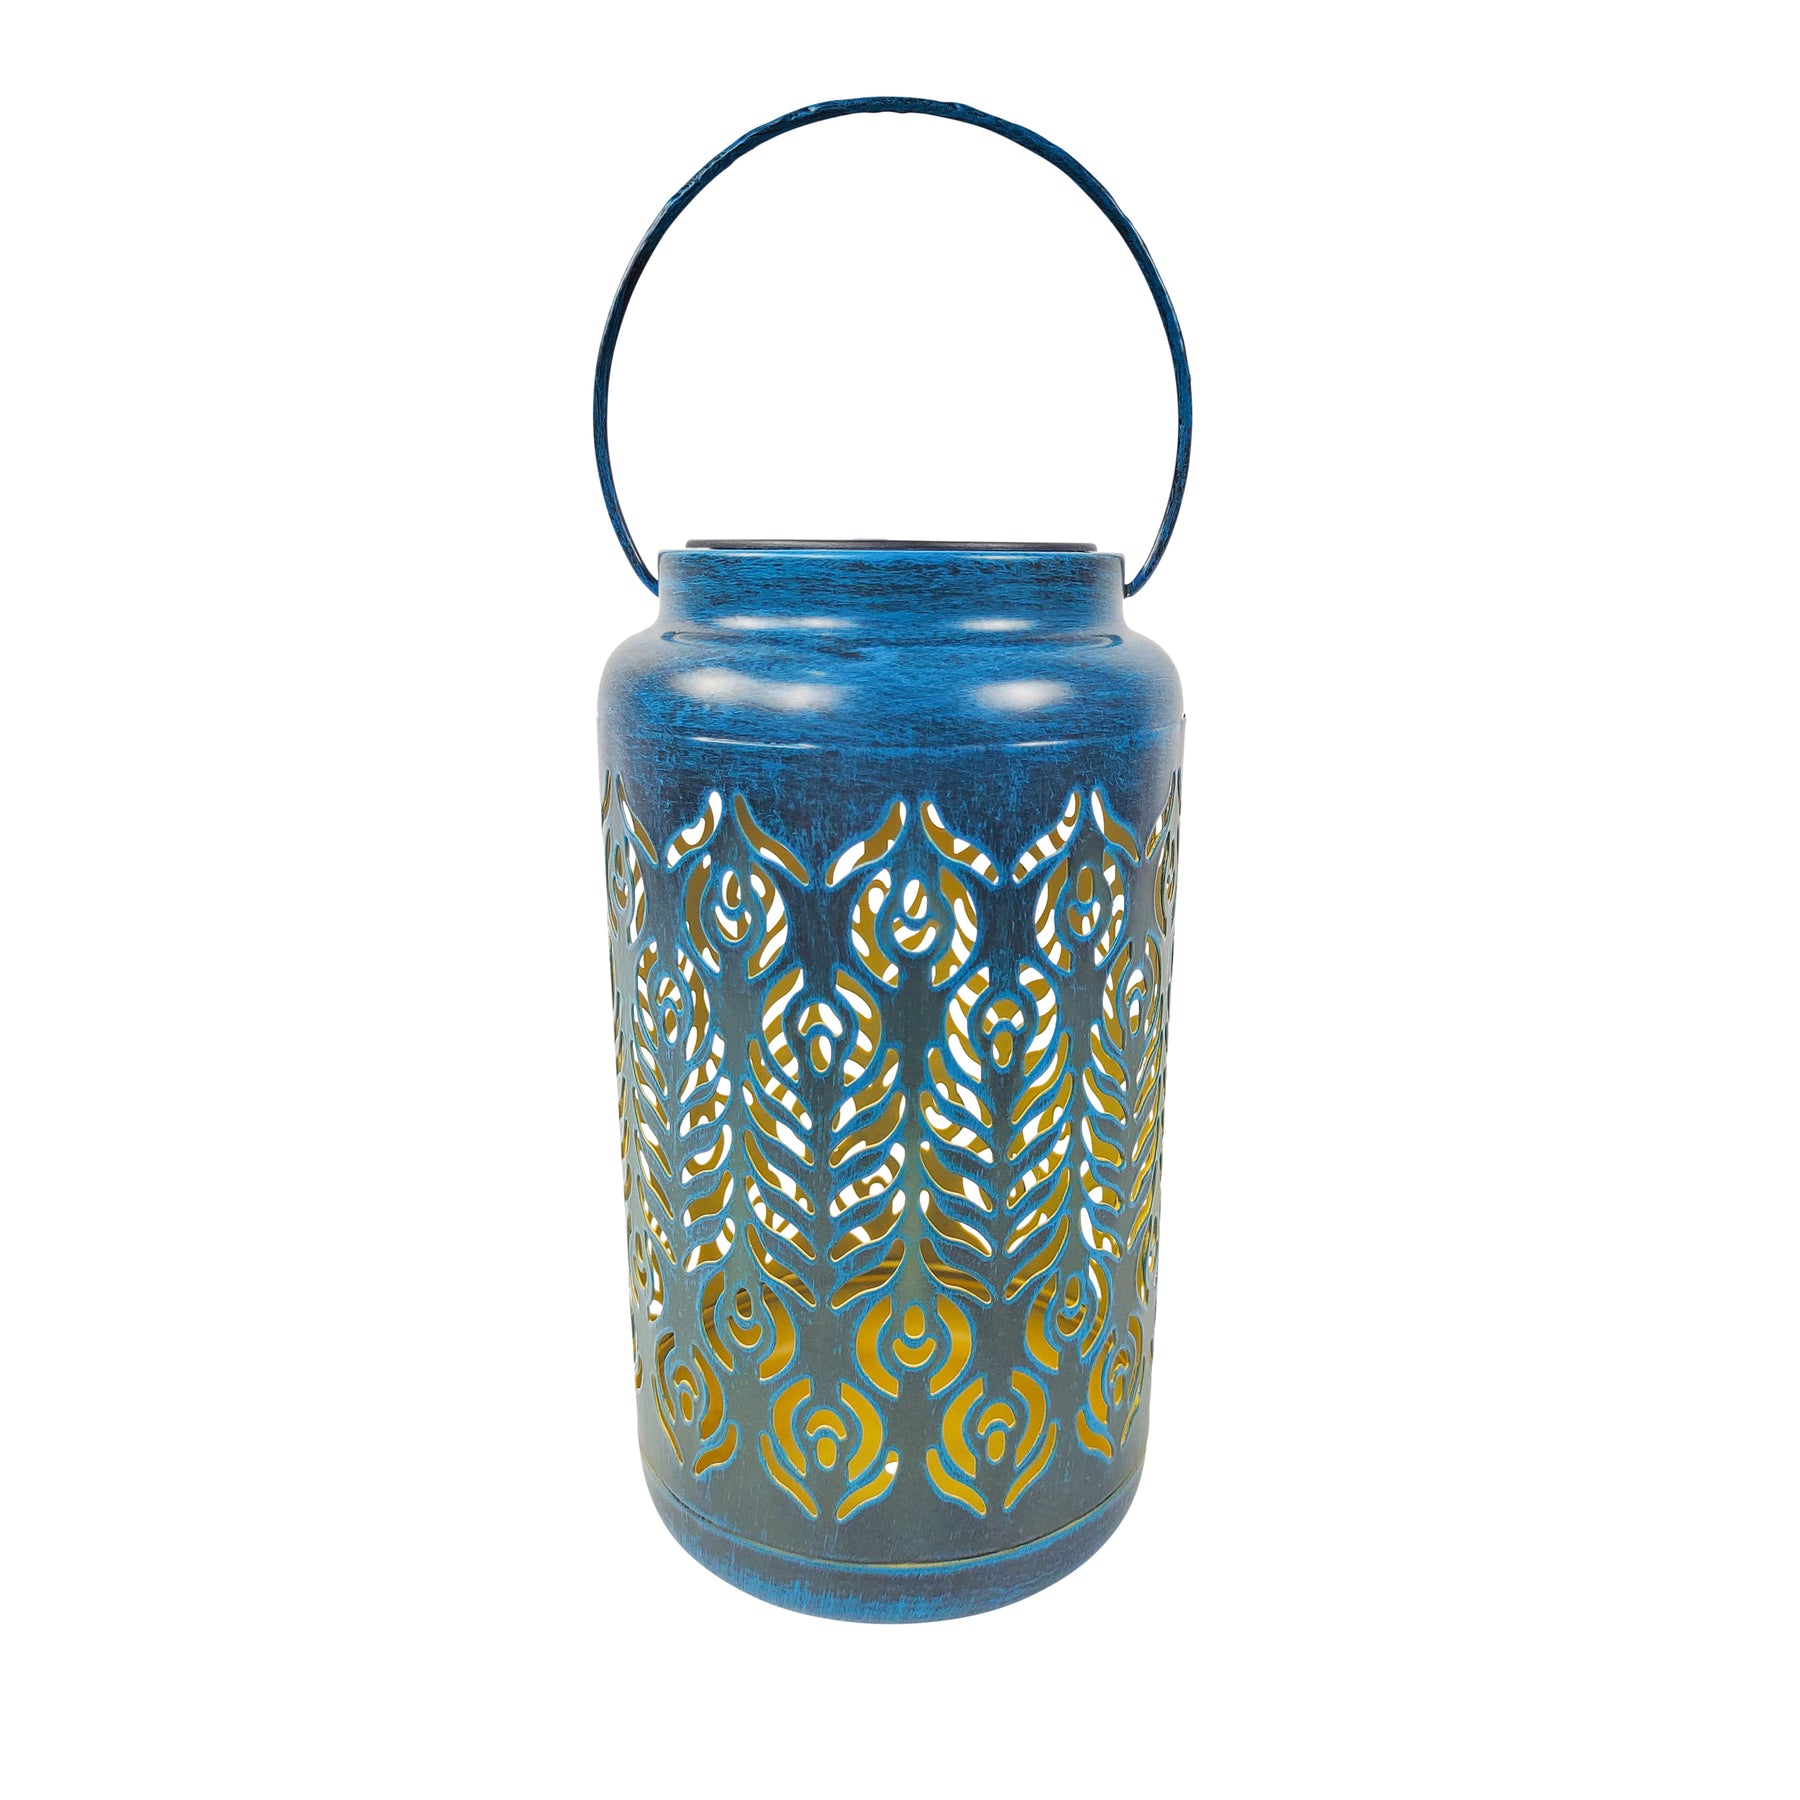 Single Bliss Outdoors 9-inch Tall Hanging and Tabletop Decorative Solar LED Lantern with Unique Phoenix Feather Design and Antique Hand Painted Finish in the Brushed Blue variation.